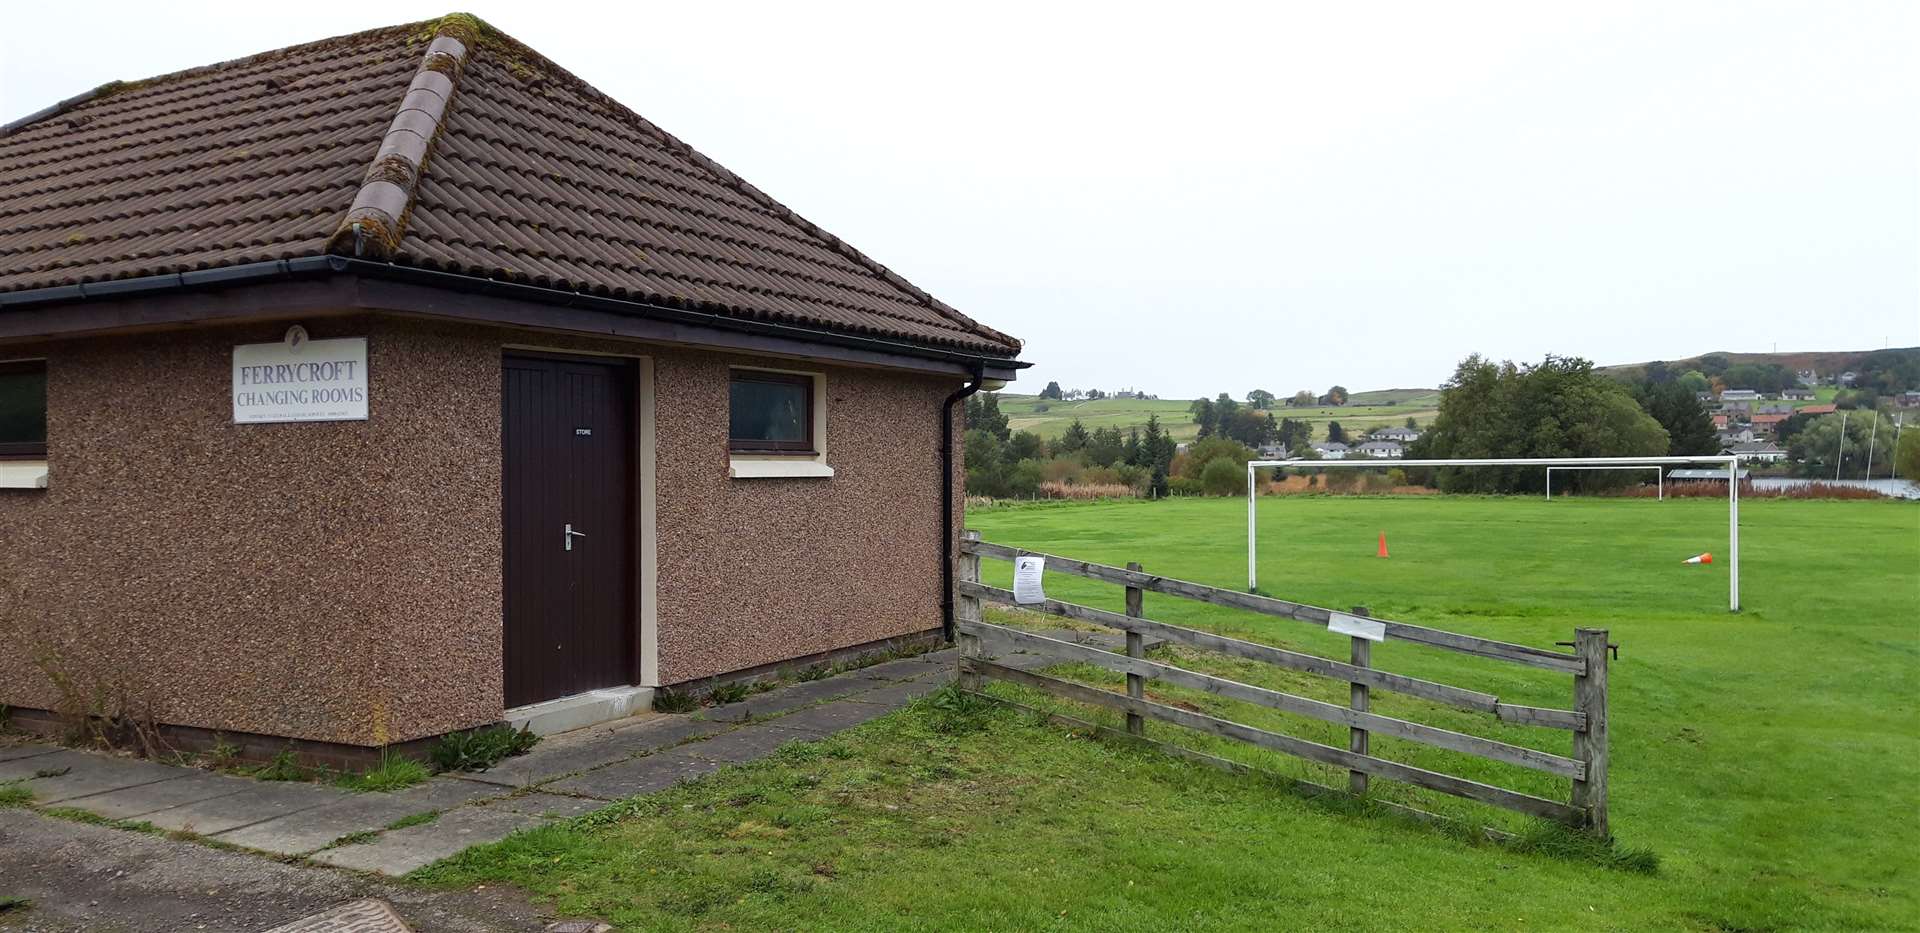 Lairg football pitch is next to the site previously earmarked for an aire.